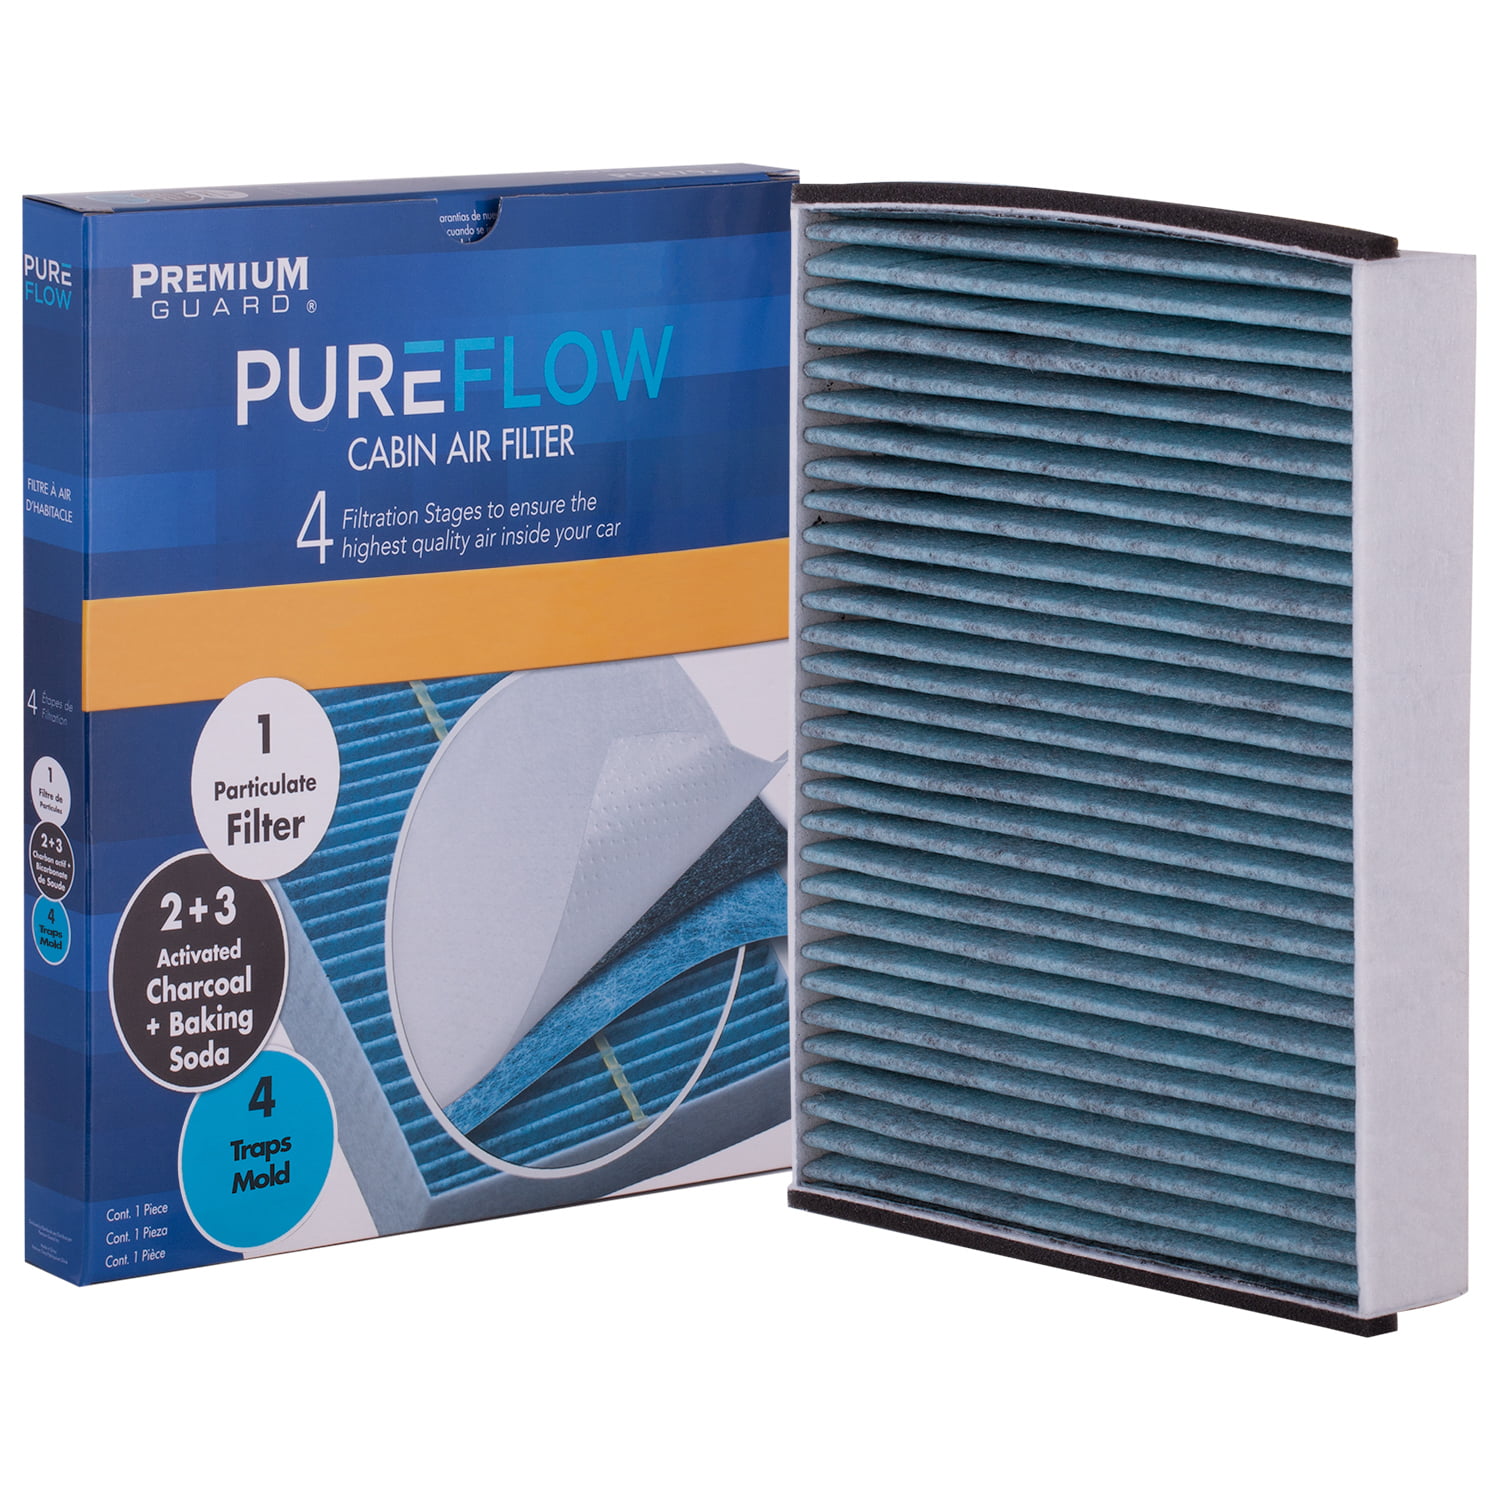 Pureflow Cabin Air Filter Pc6174x Fits 11 18 Ford Focus 13 18 Escape 14 18 Transit Connect C Max 13 18 17 Gt 13 14 Police Interceptor Utility 15 18 Lincoln Mkc Walmart Com